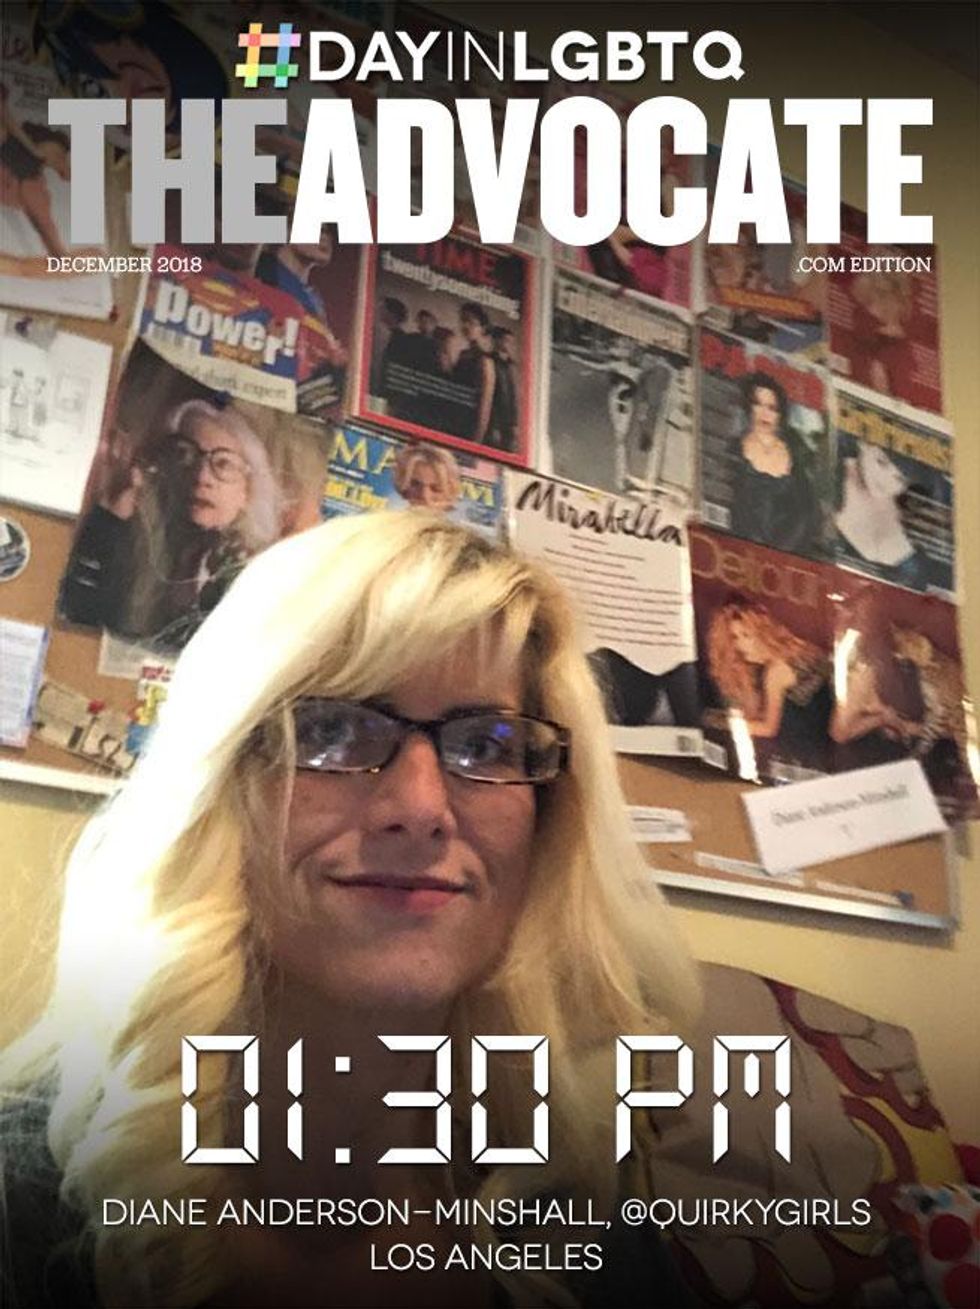 Pm-01-30-diane-theadvocate-2018-dayinlgbt-cover-template-655